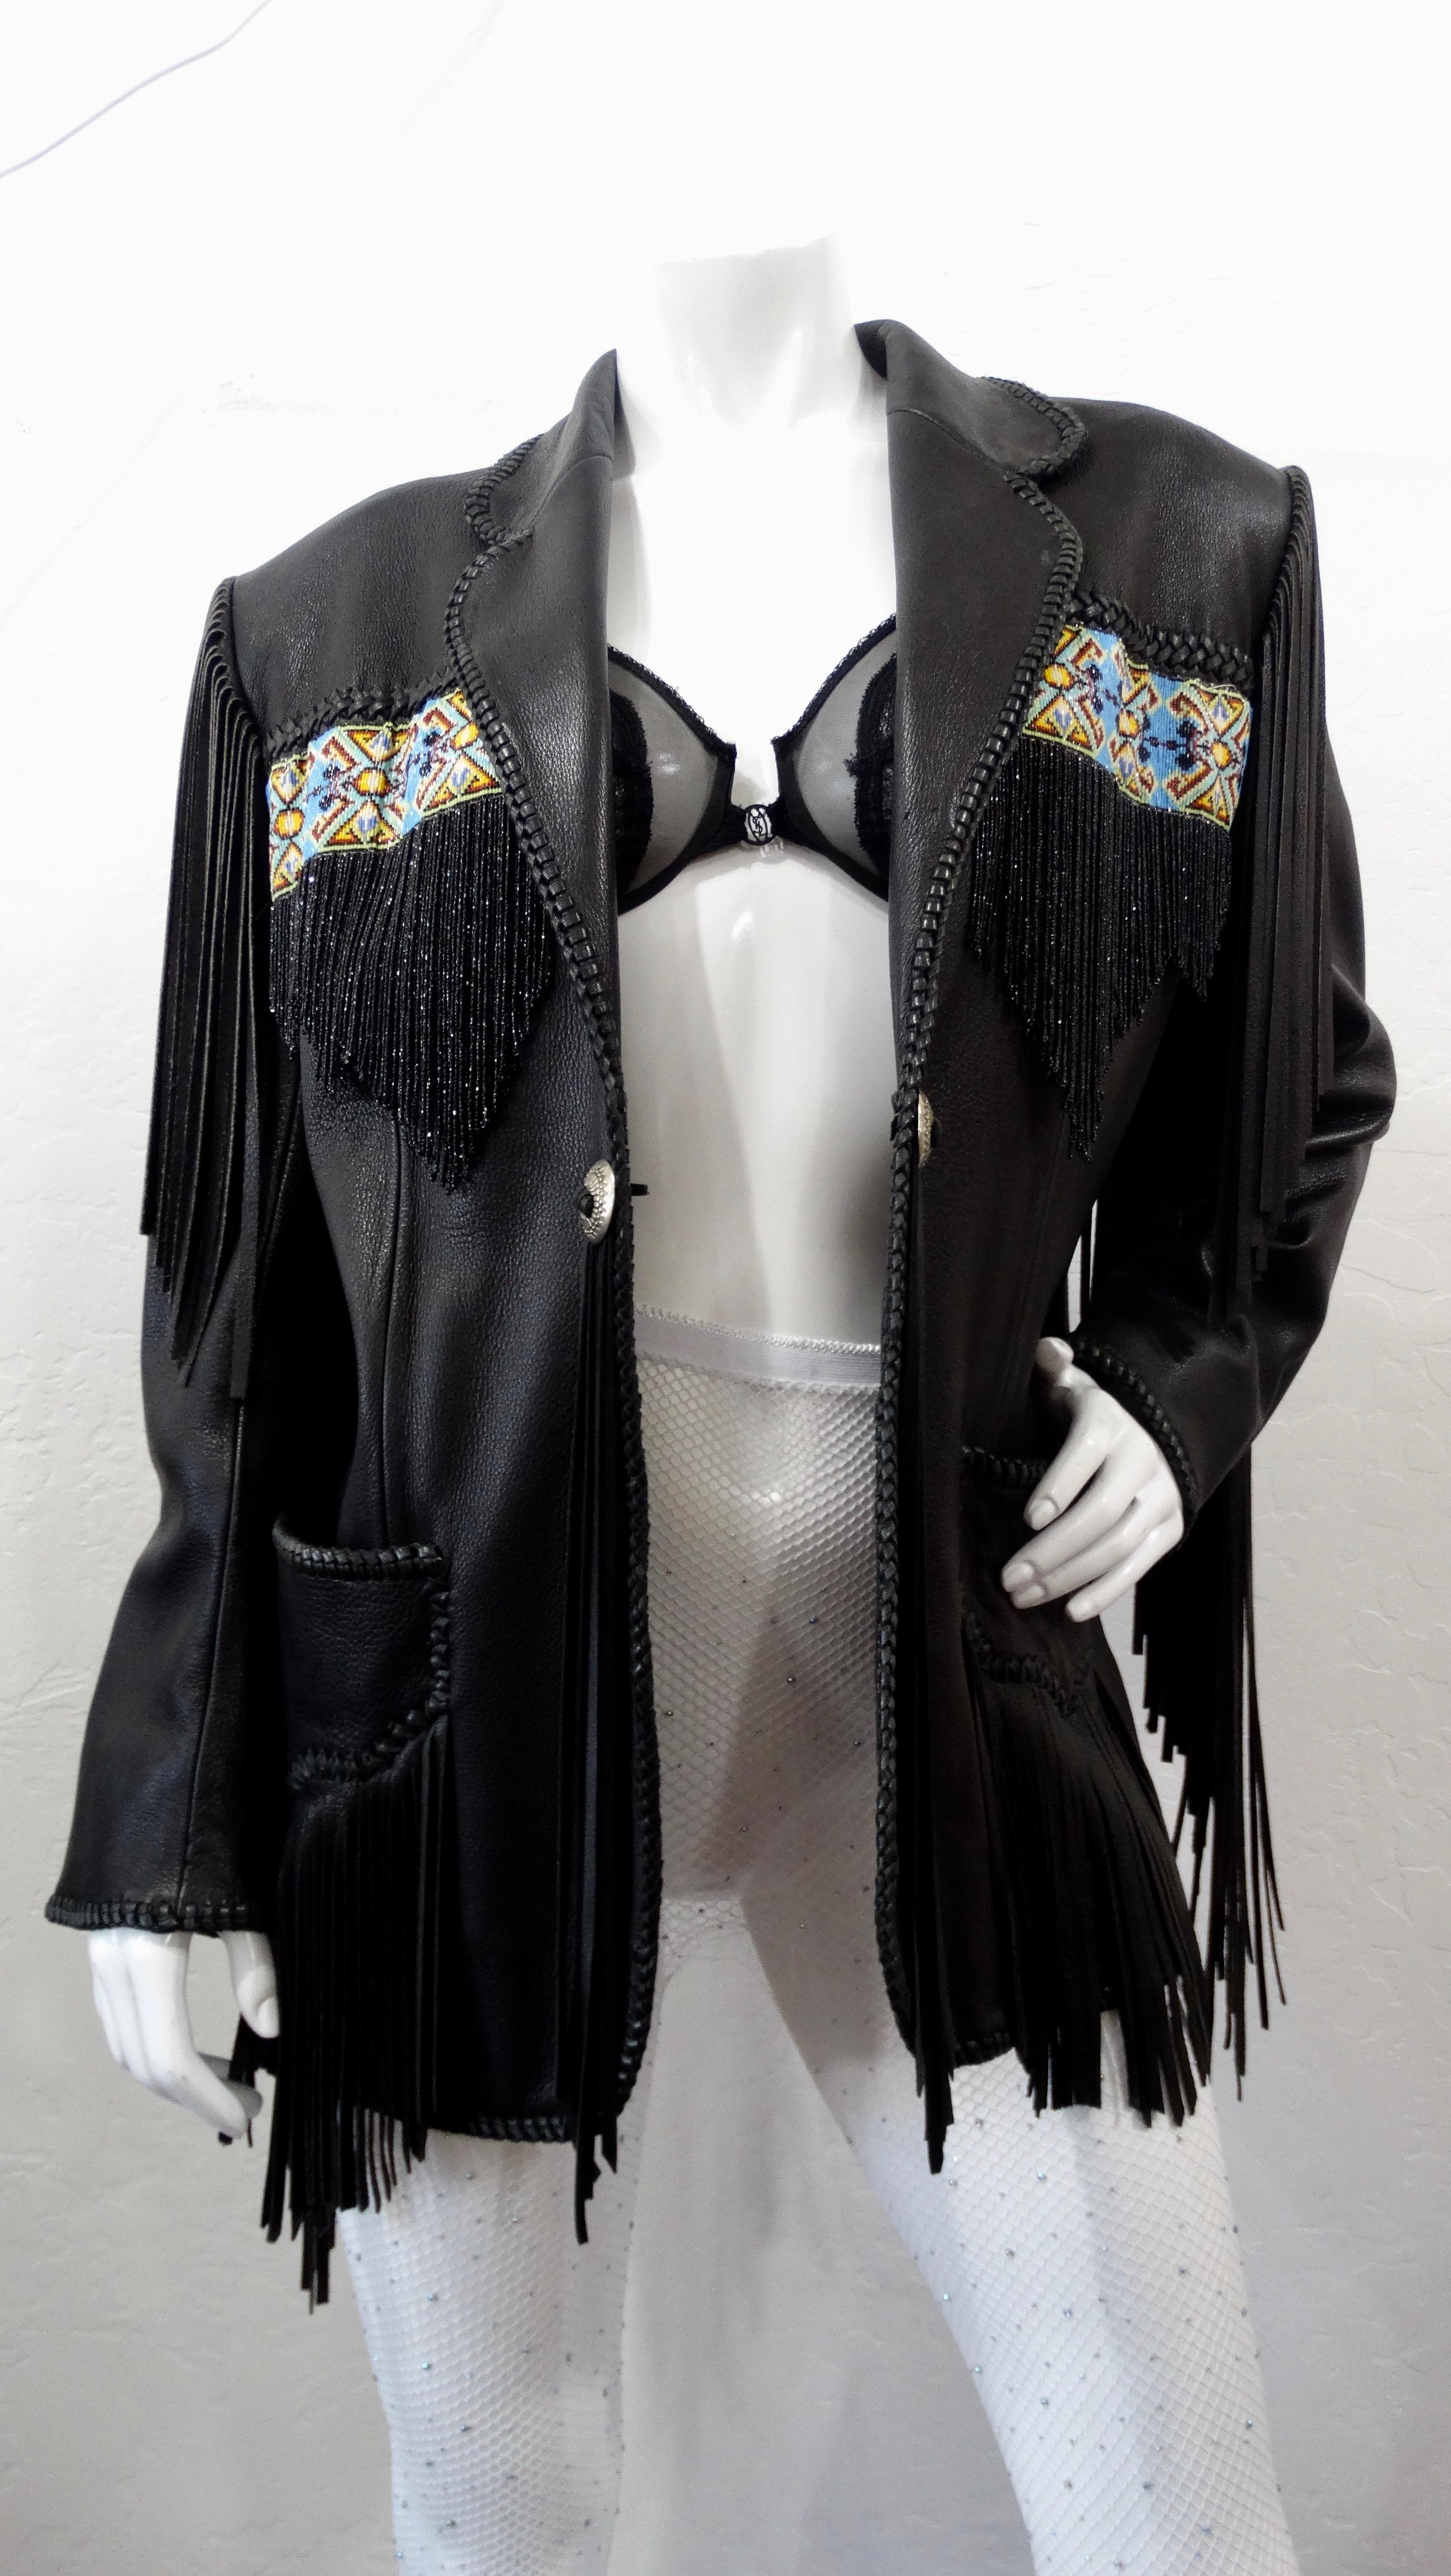 All eyes on you when wearing this amazing vintage leather jacket! Circa late 20th century from Chic Skins of California, this soft black leather jacket features leather and black beaded fringe, two front pockets, exposed leather basket weave